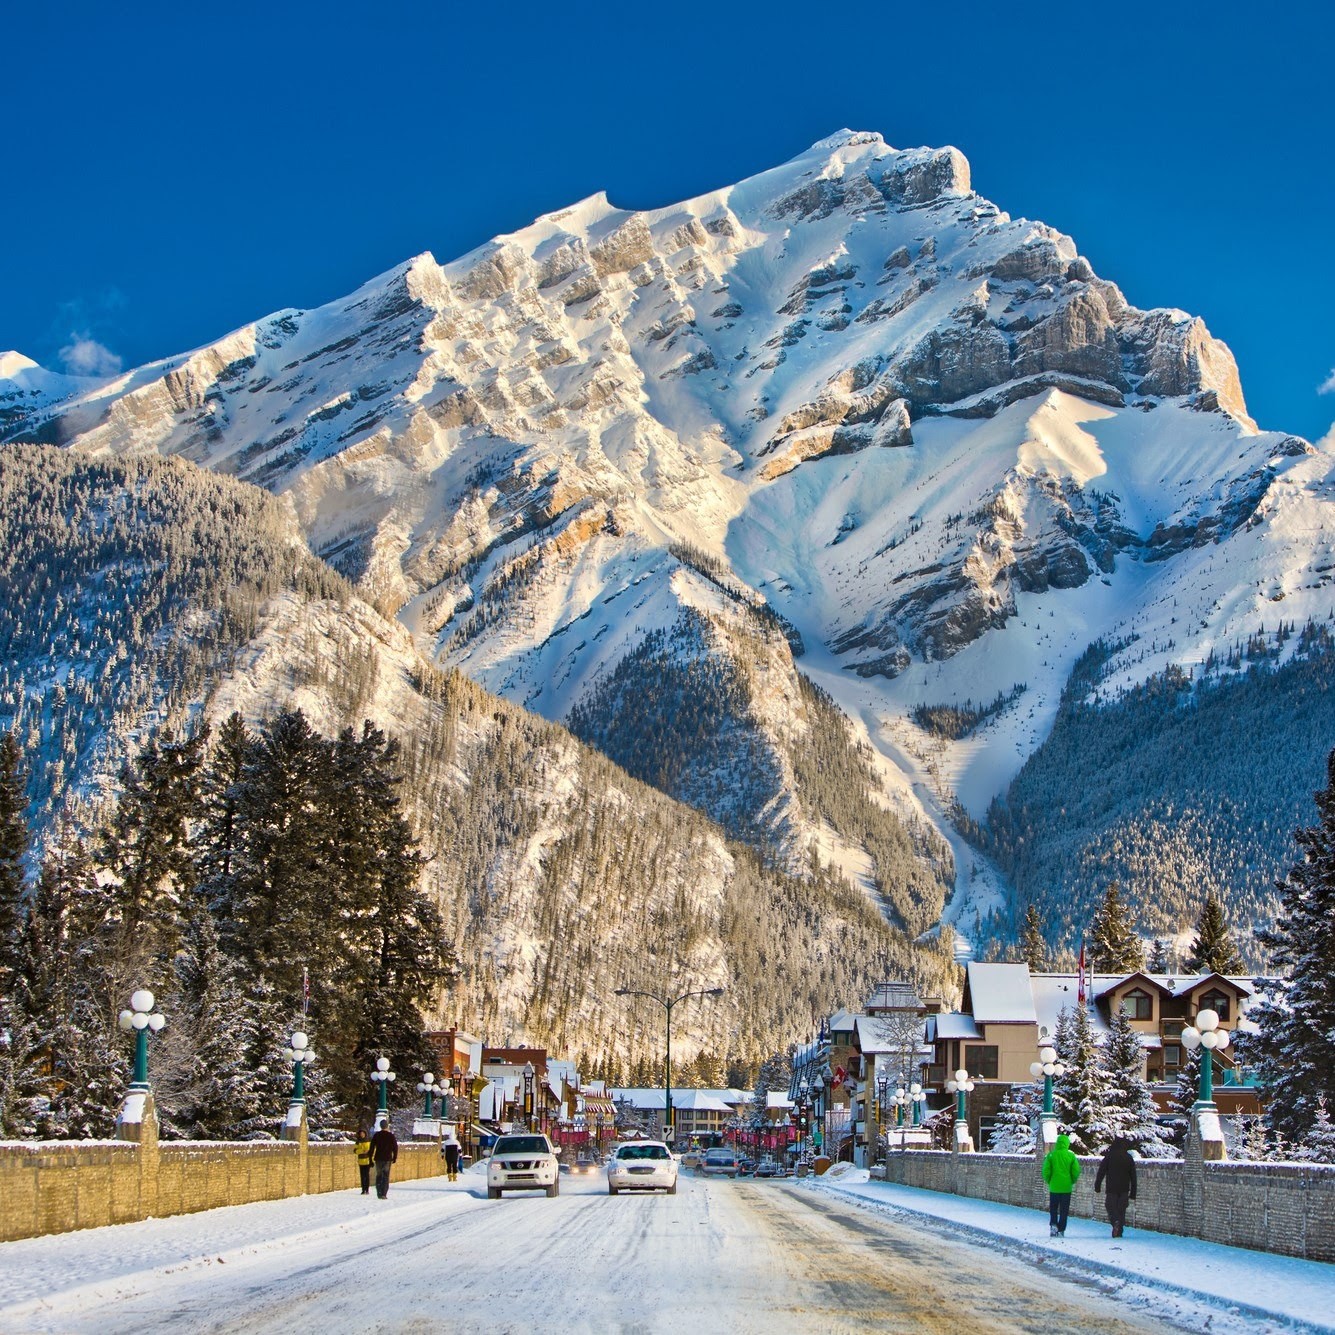 Why Canada is a top winter destination